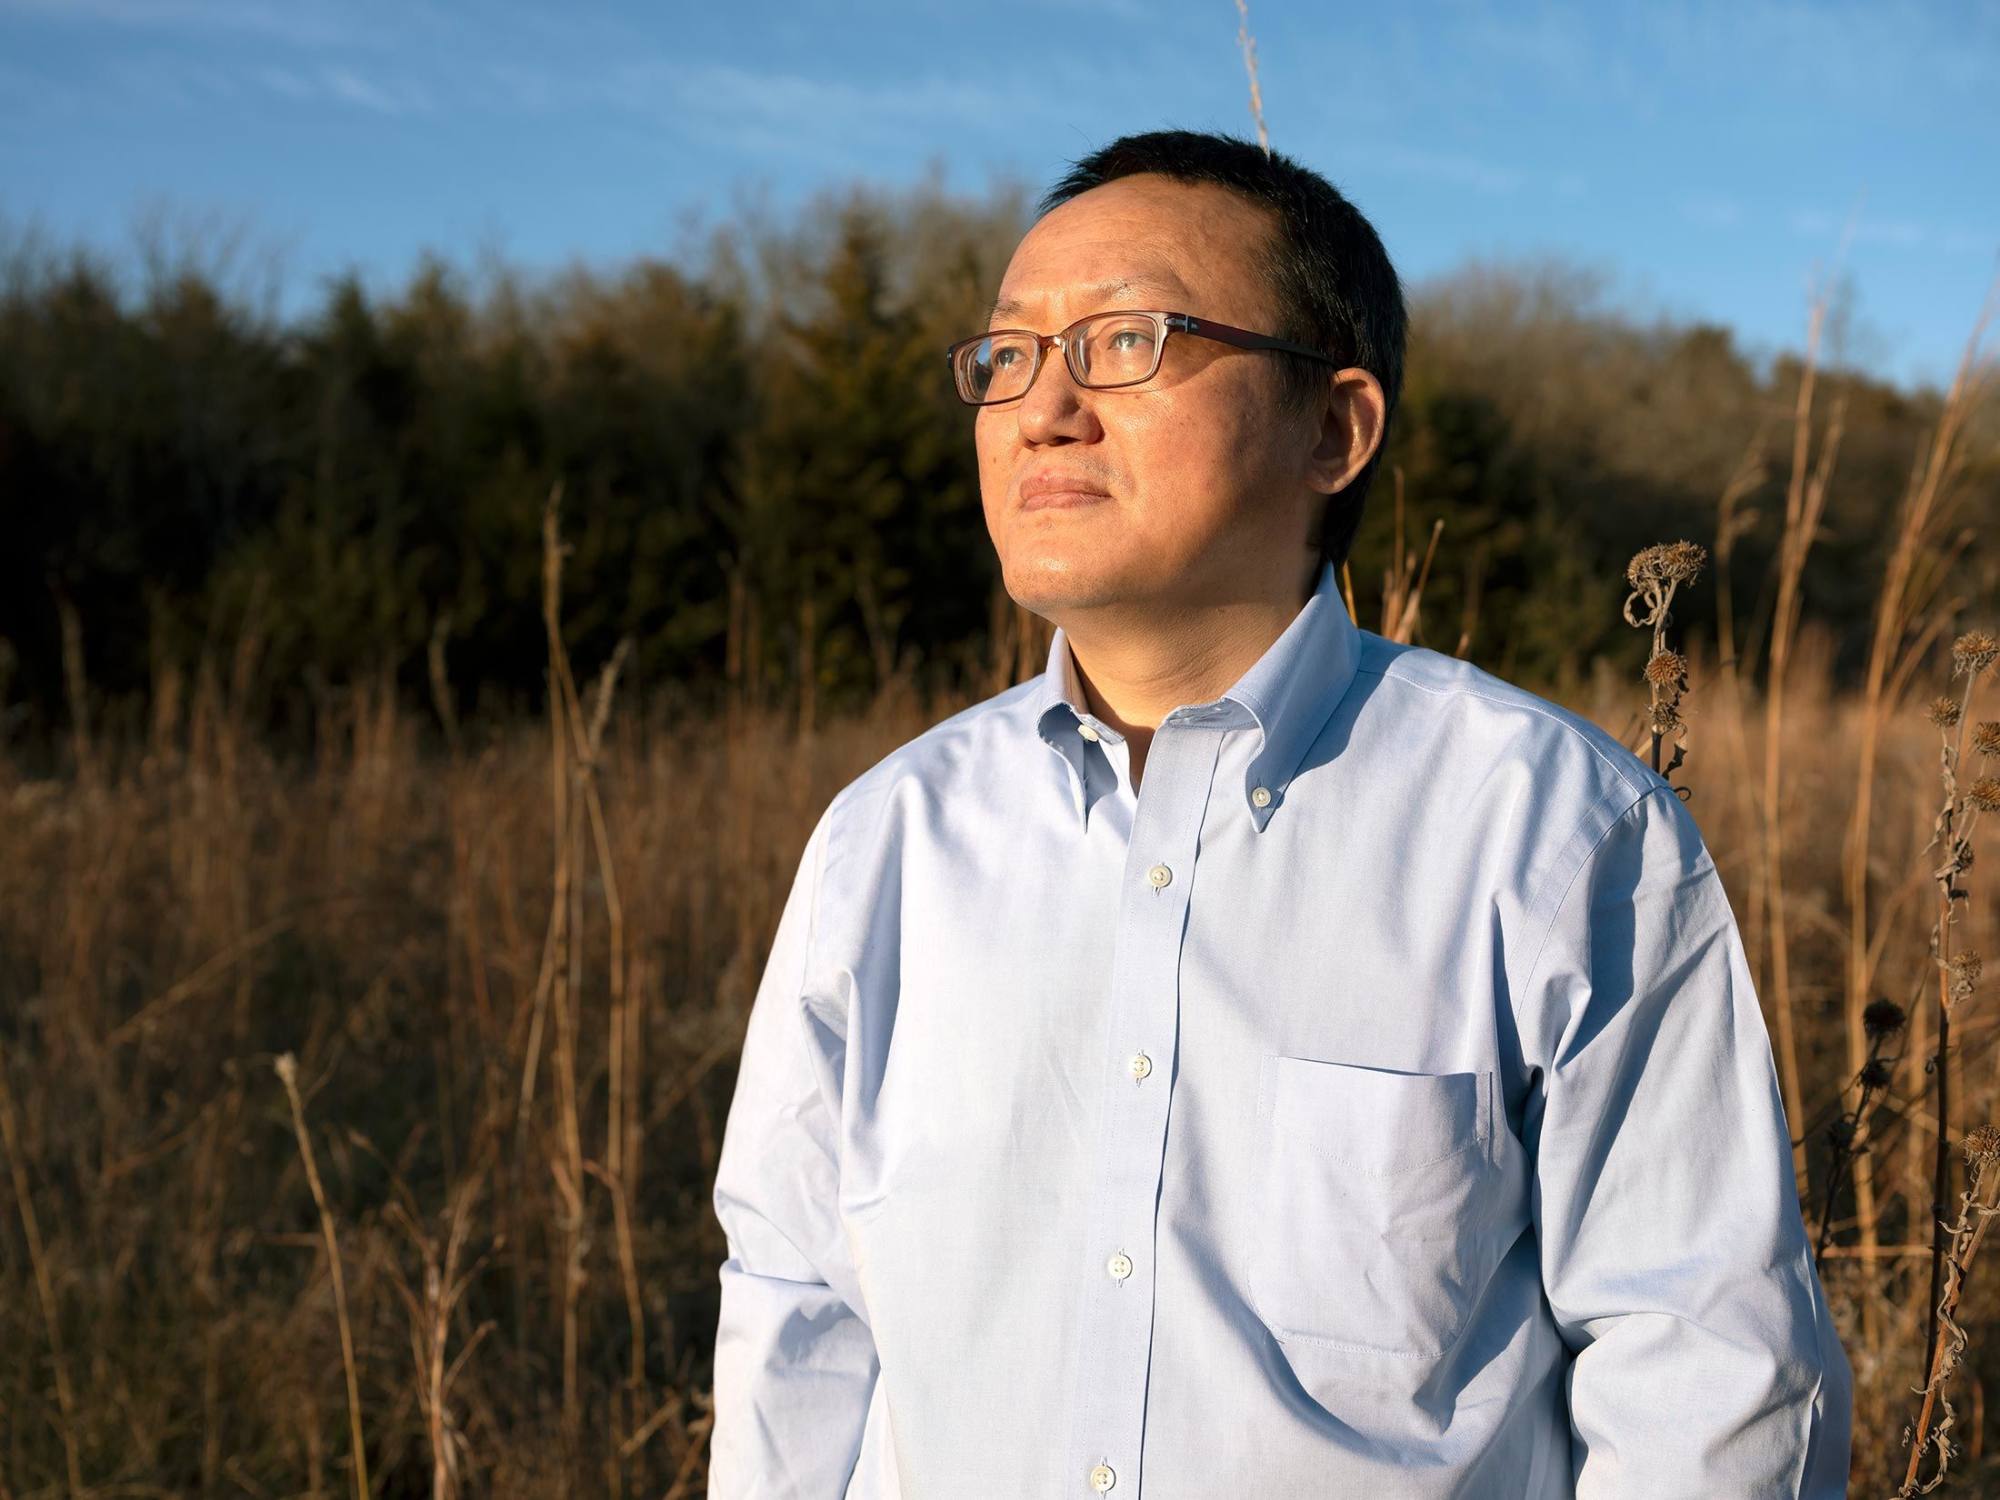 Franklin Tao was the first professor indicted by the US Justice Department after it announced the China Initiative in 2018. Photo: Bloomberg Businessweek